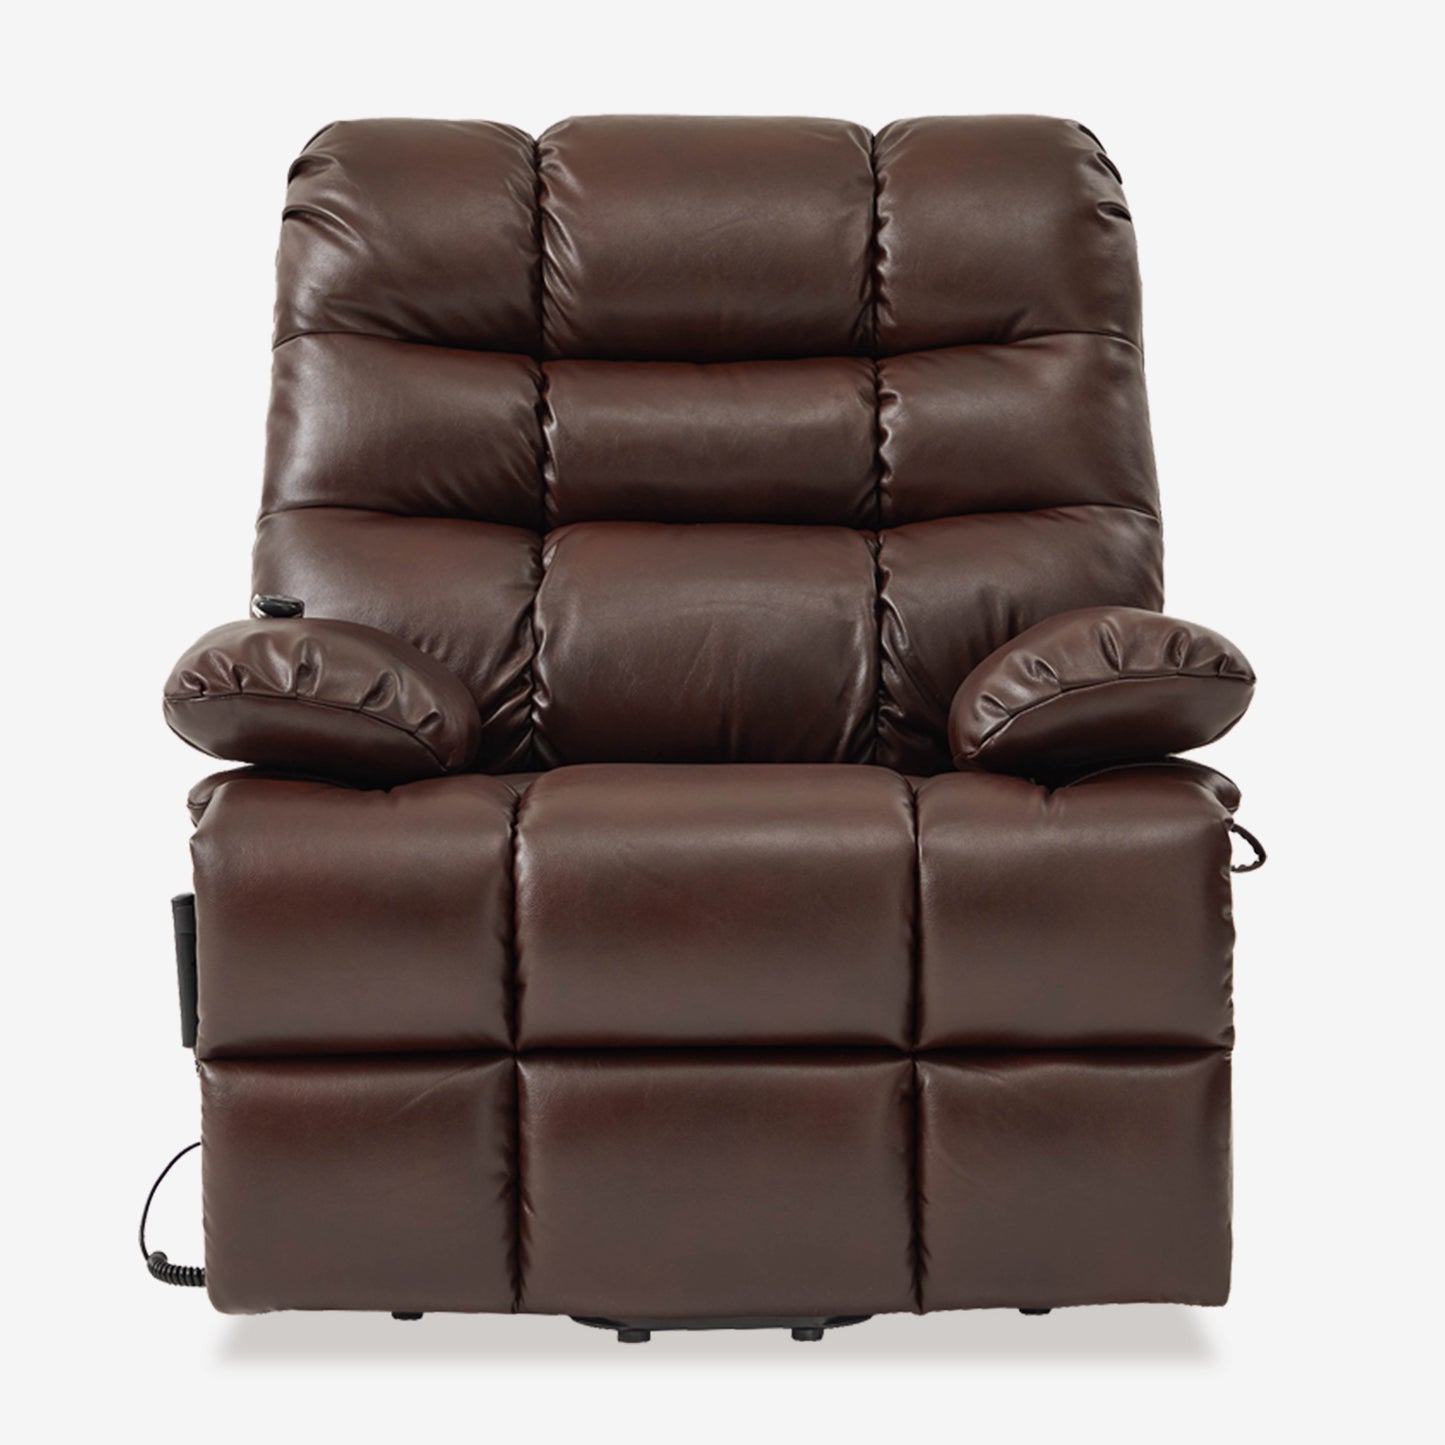 Big Man Recliners With 400-lb Weight Capacity and Heating Massage